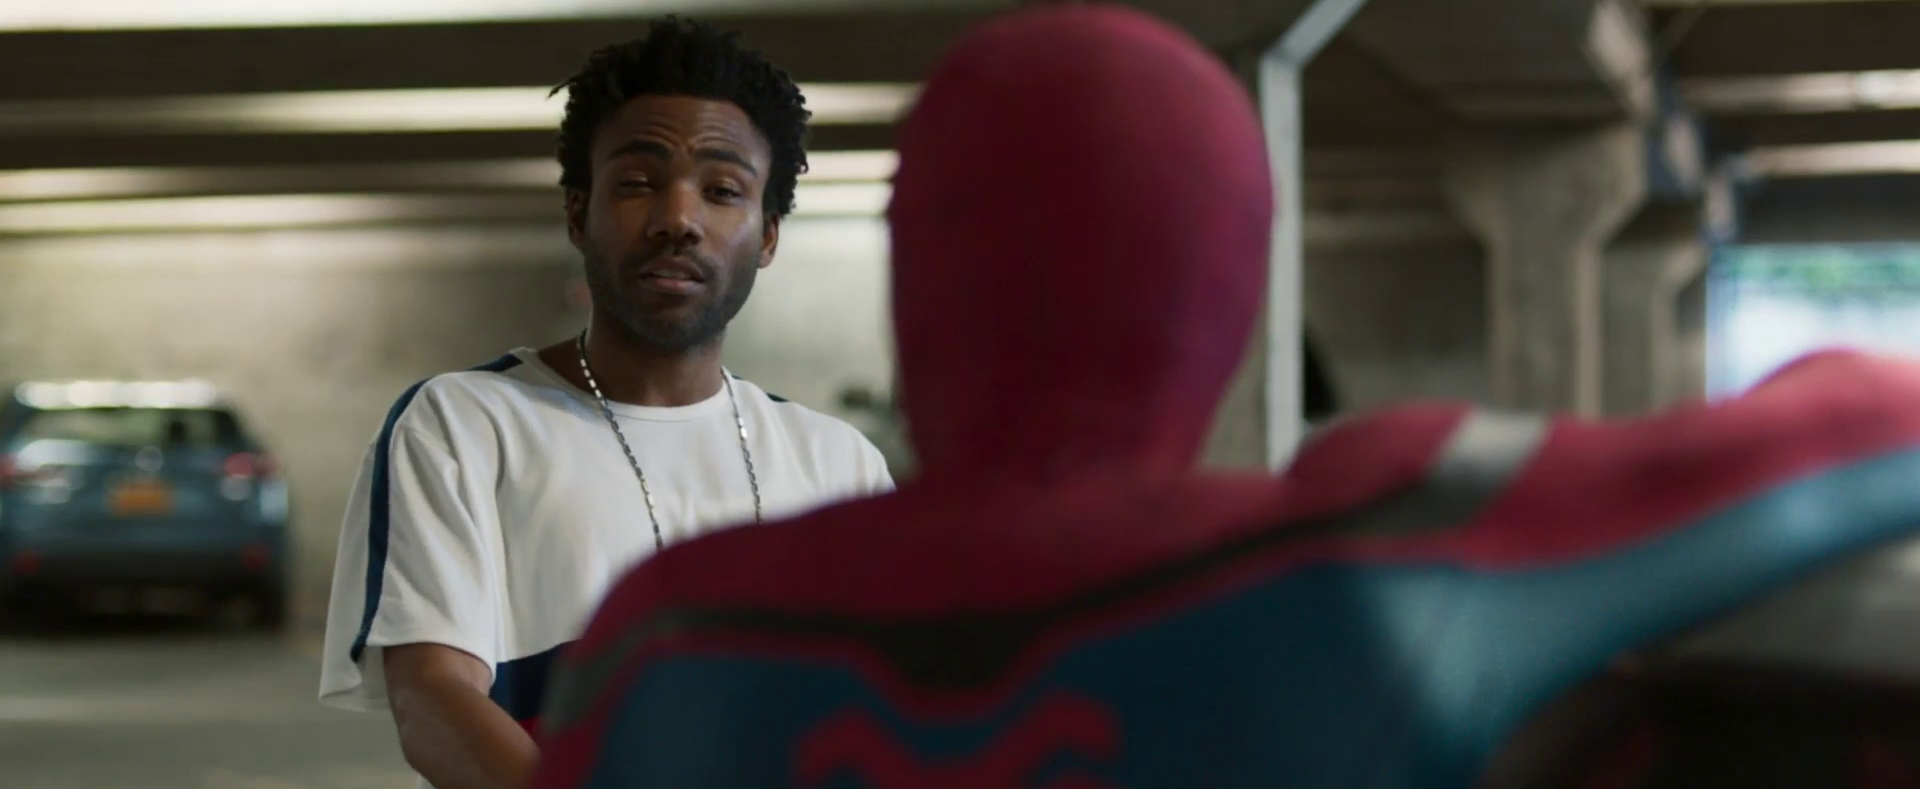 donald_glover_smh_trailer_3.png